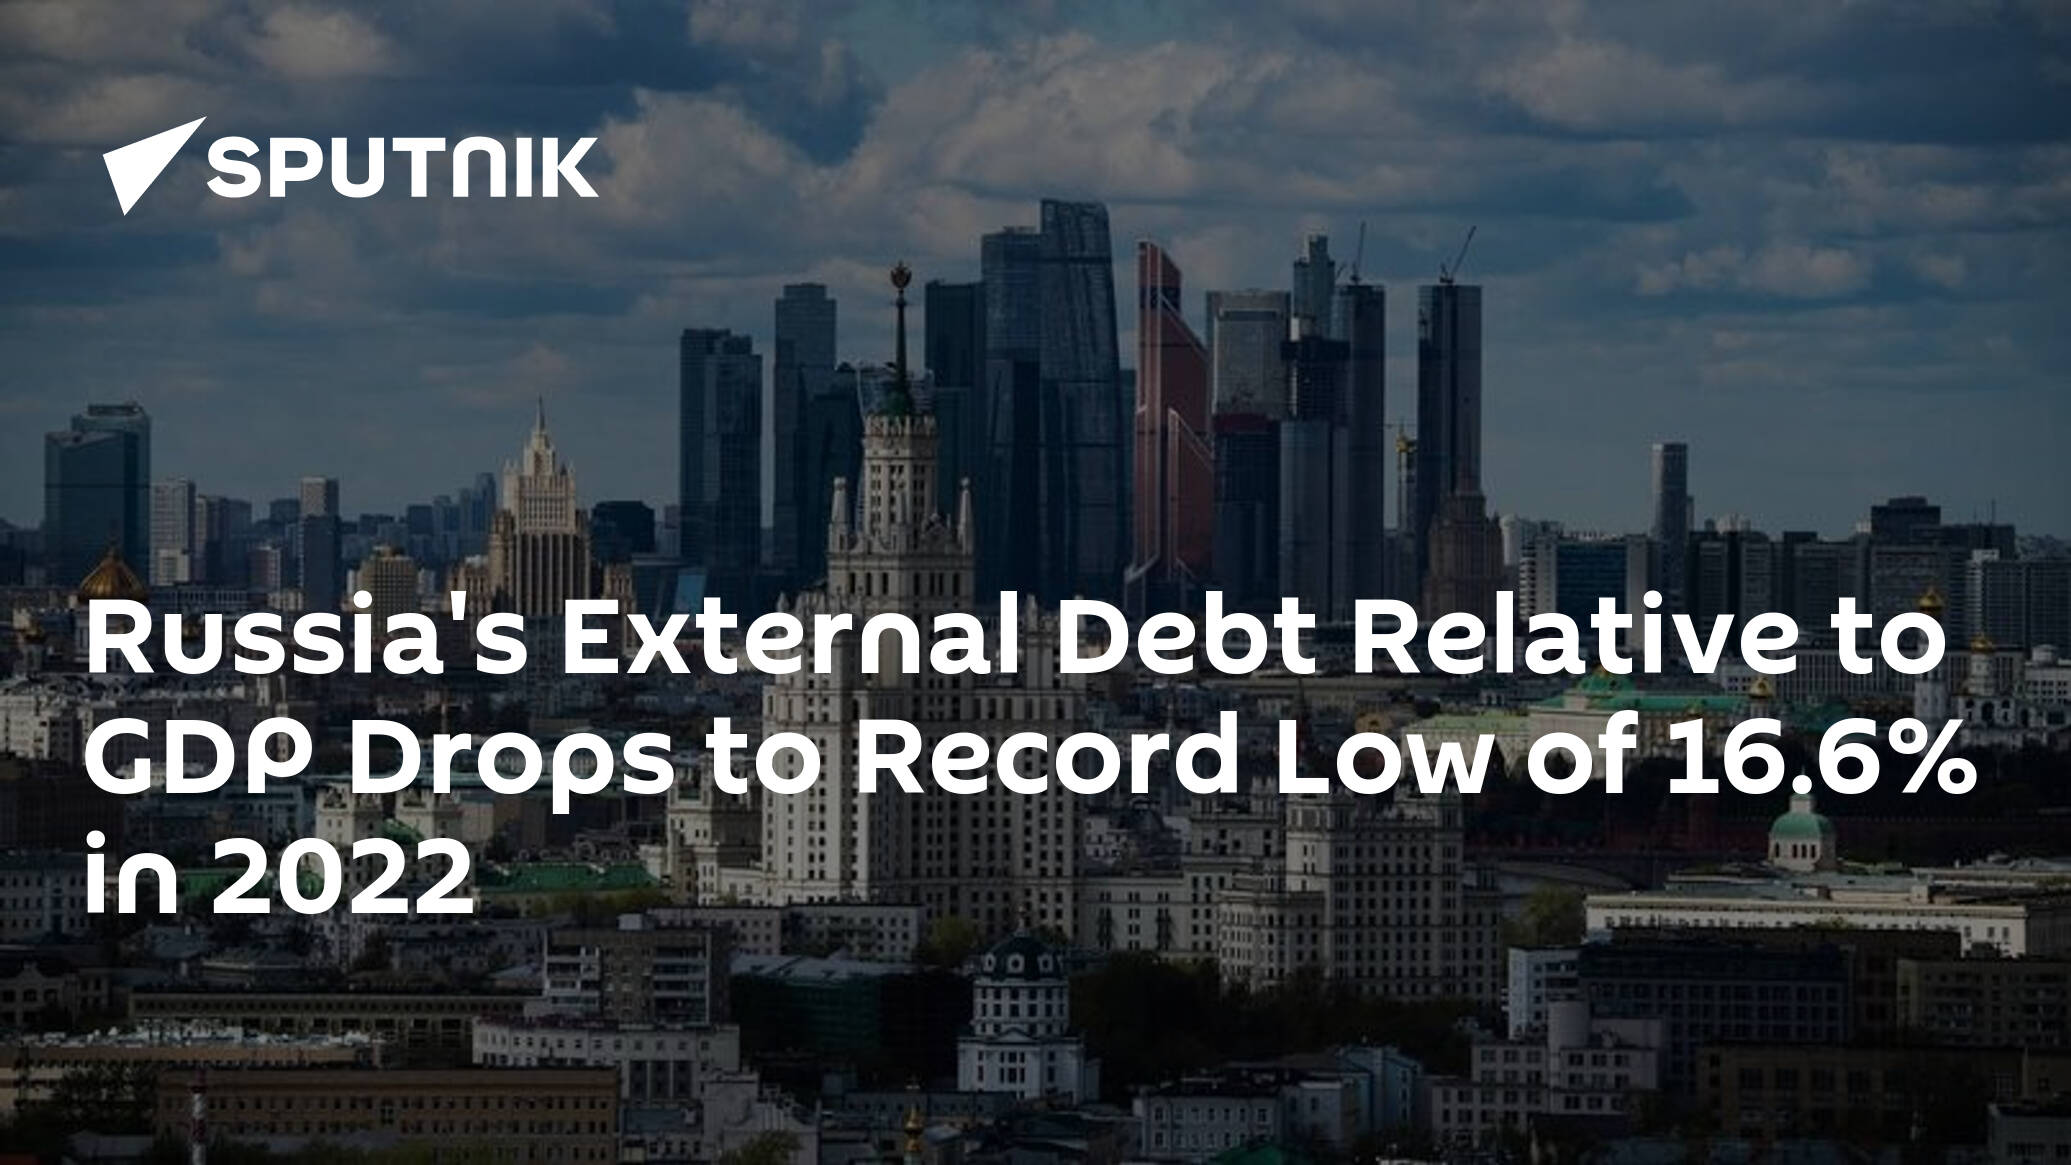 Russia's External Debt Relative to GDP Drops to Record Low of 16.6% in 2022